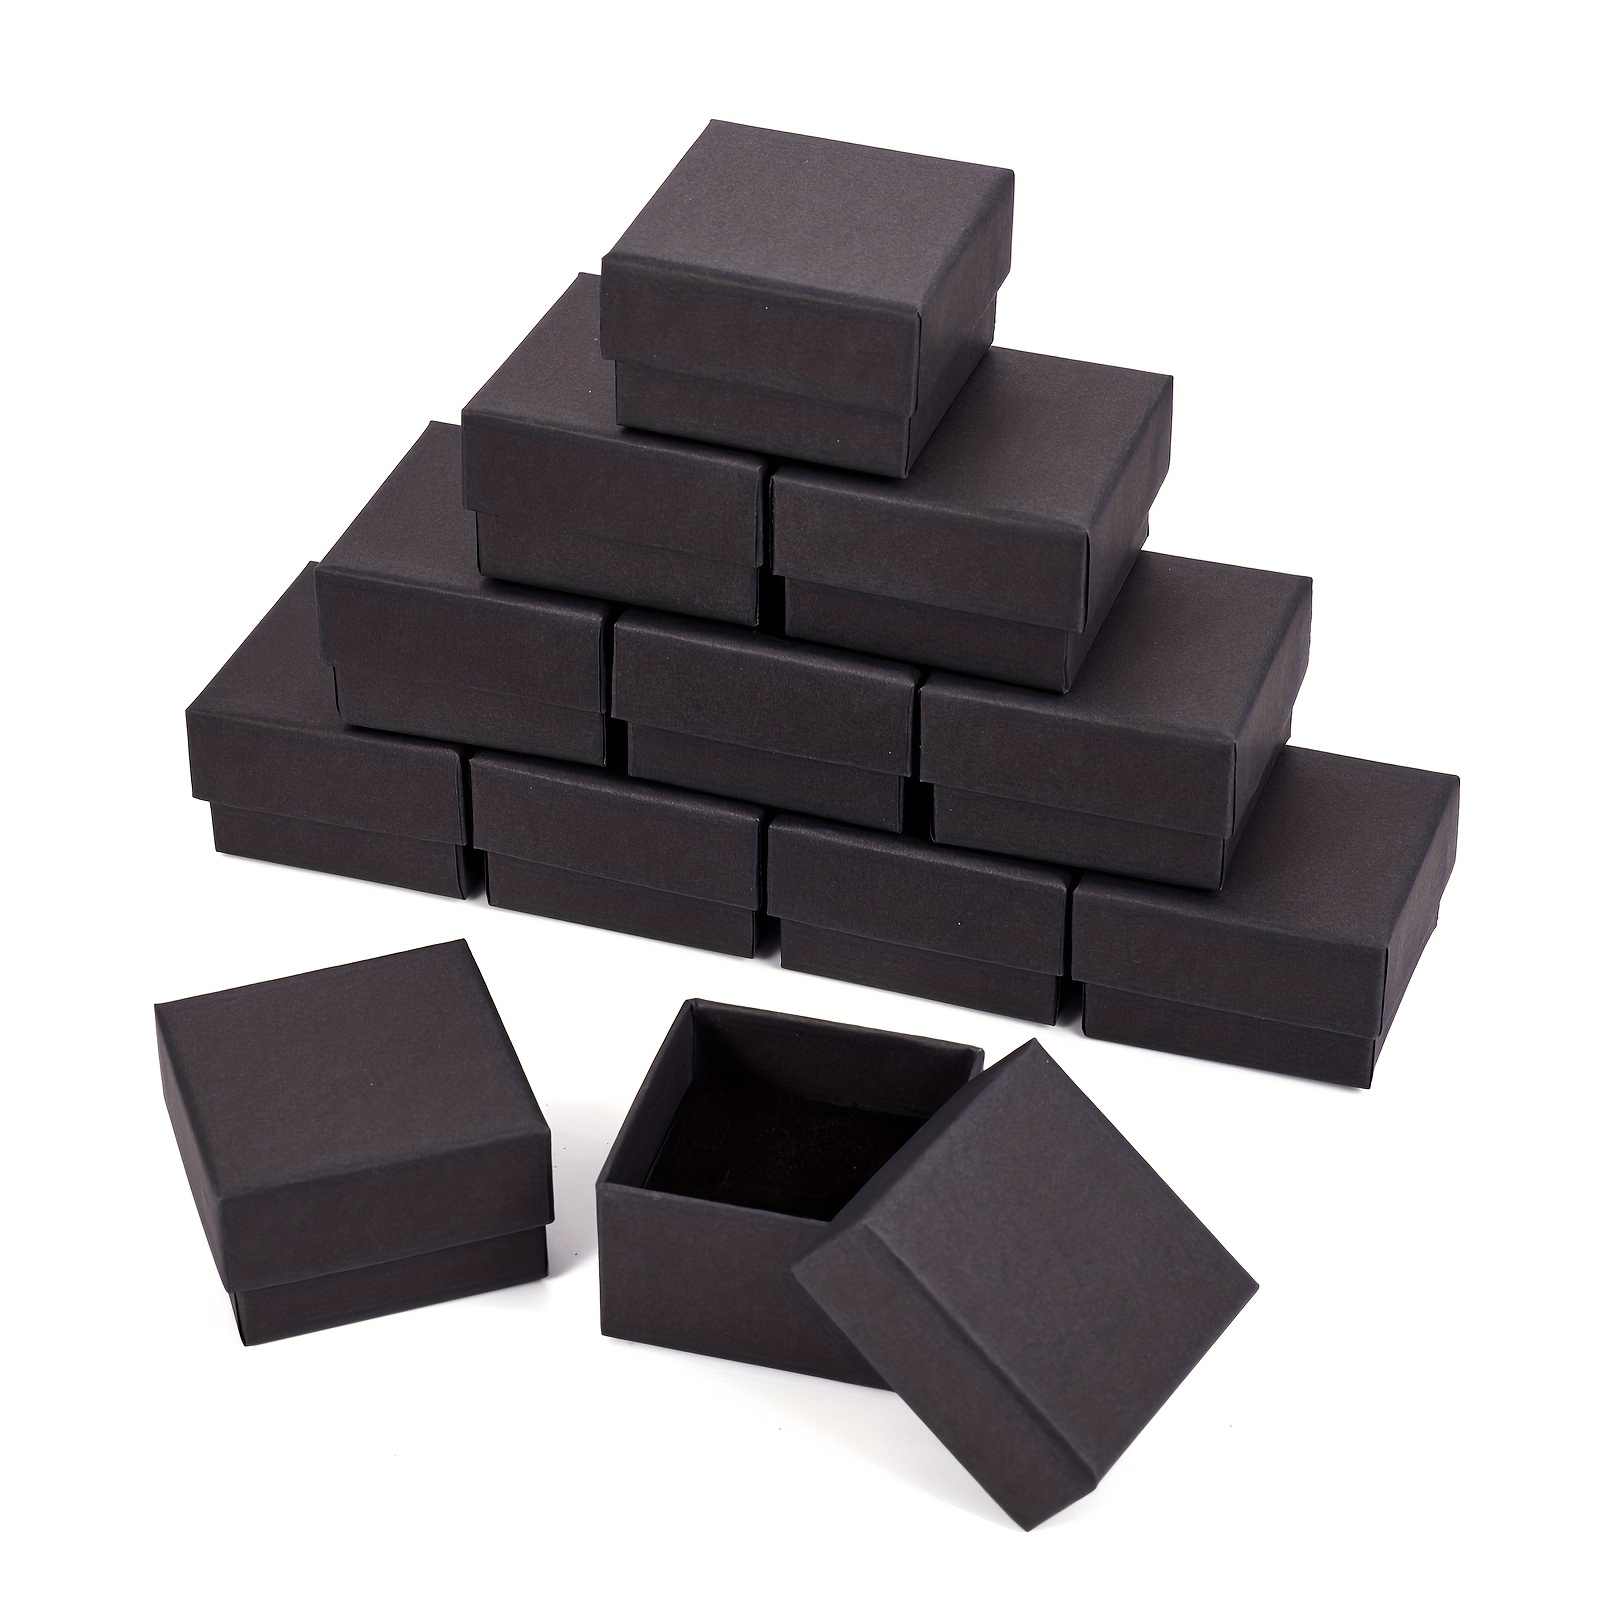 

24pcs, Ring Boxes, Jewelry Boxes, Square, With Sponge Inside, Black Paper Cardboard, Wedding Decor, Wedding Supplies, Jewelry Gift Box